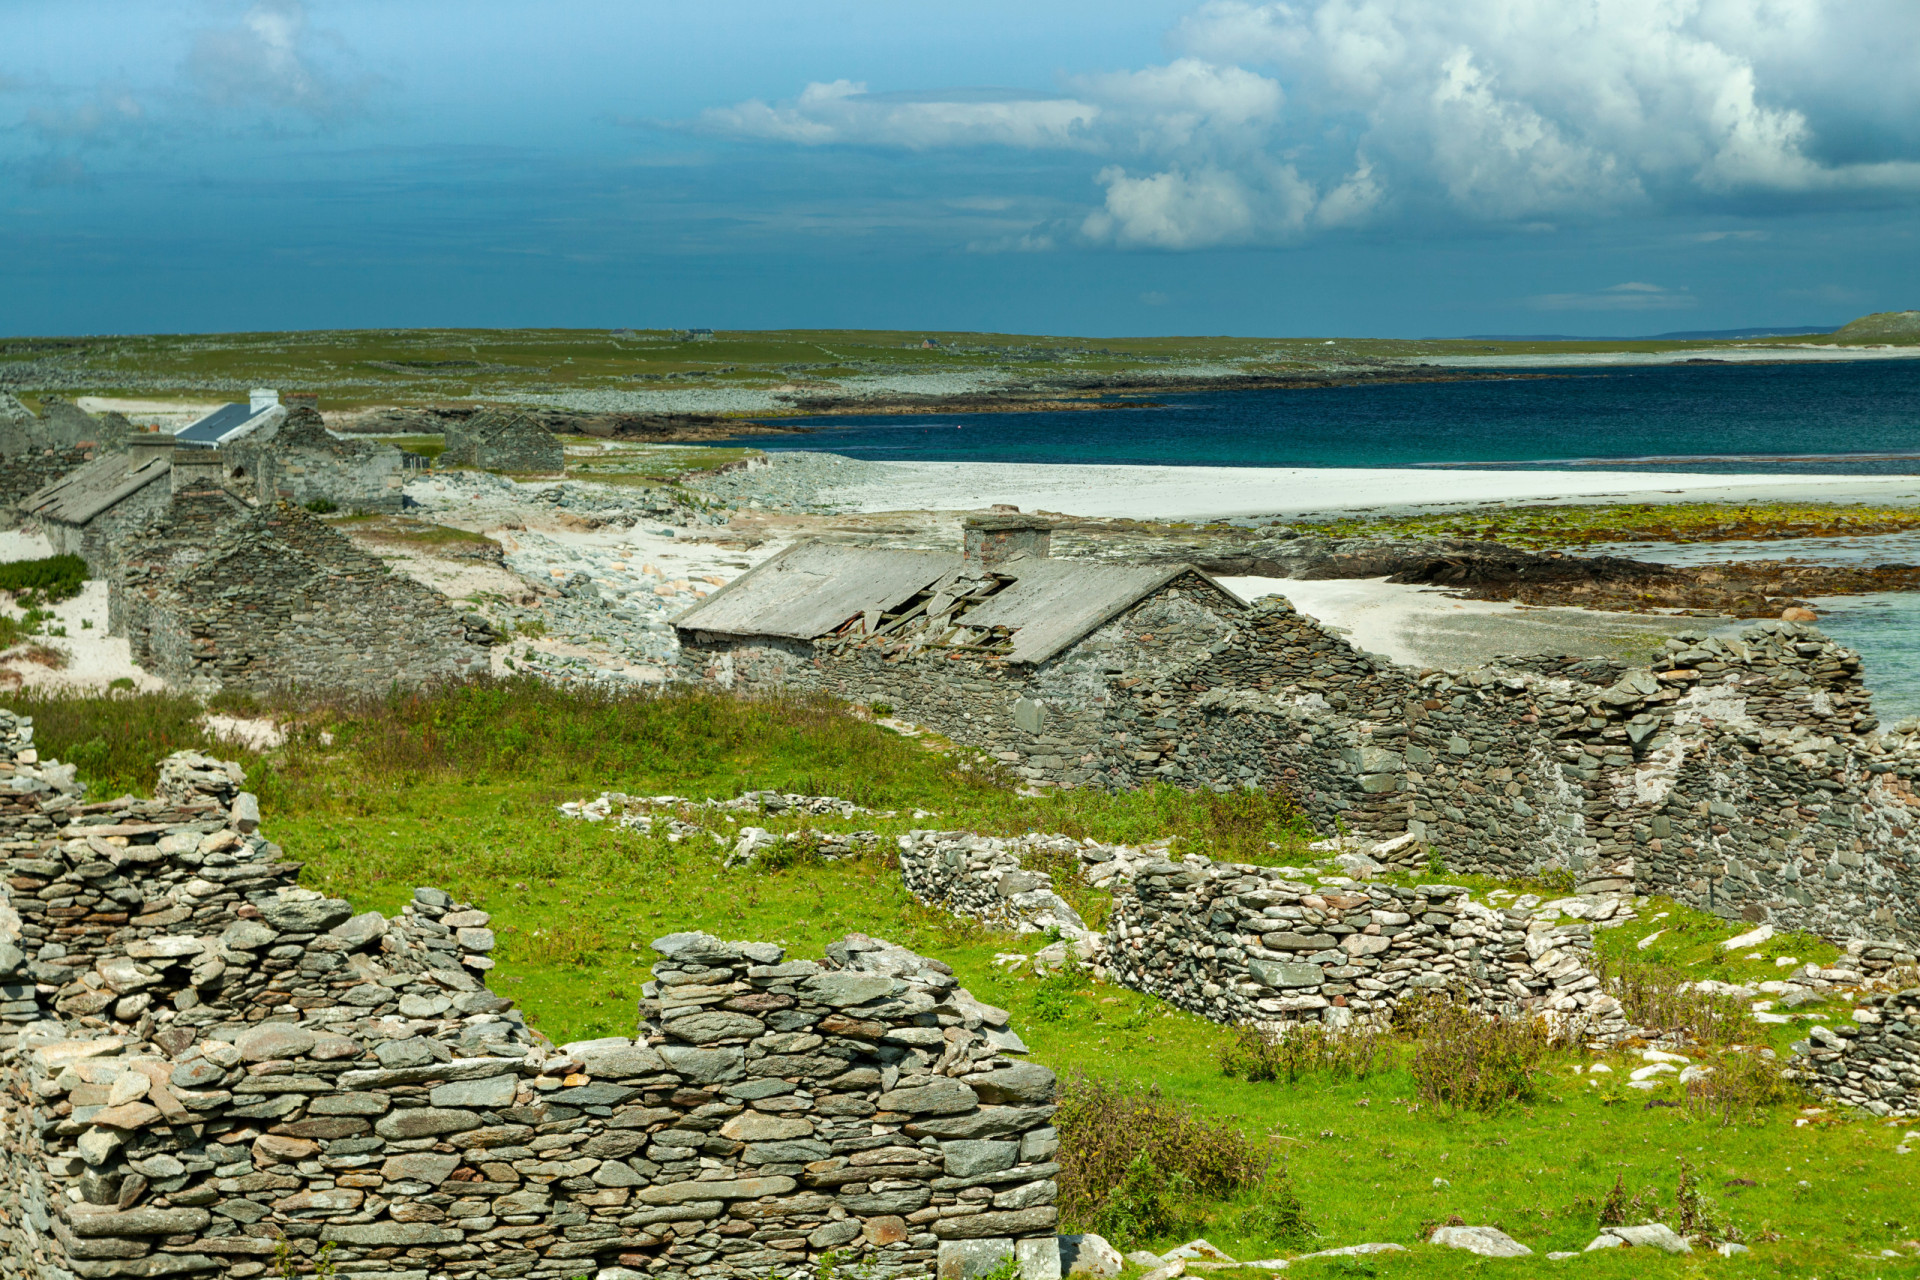 <p>The remains of stone cottages from the 1800s still stand on the islands, a relic of the past and the <a href="https://www.starsinsider.com/lifestyle/502545/the-worst-famines-in-history" rel="noopener">Famine</a>'s legacy. Visitors can explore the unspoiled islands on foot.</p><p>You may also like:<a href="https://www.starsinsider.com/n/284870?utm_source=msn.com&utm_medium=display&utm_campaign=referral_description&utm_content=621106en-au"> Authors who hated their movie adaptations</a></p>